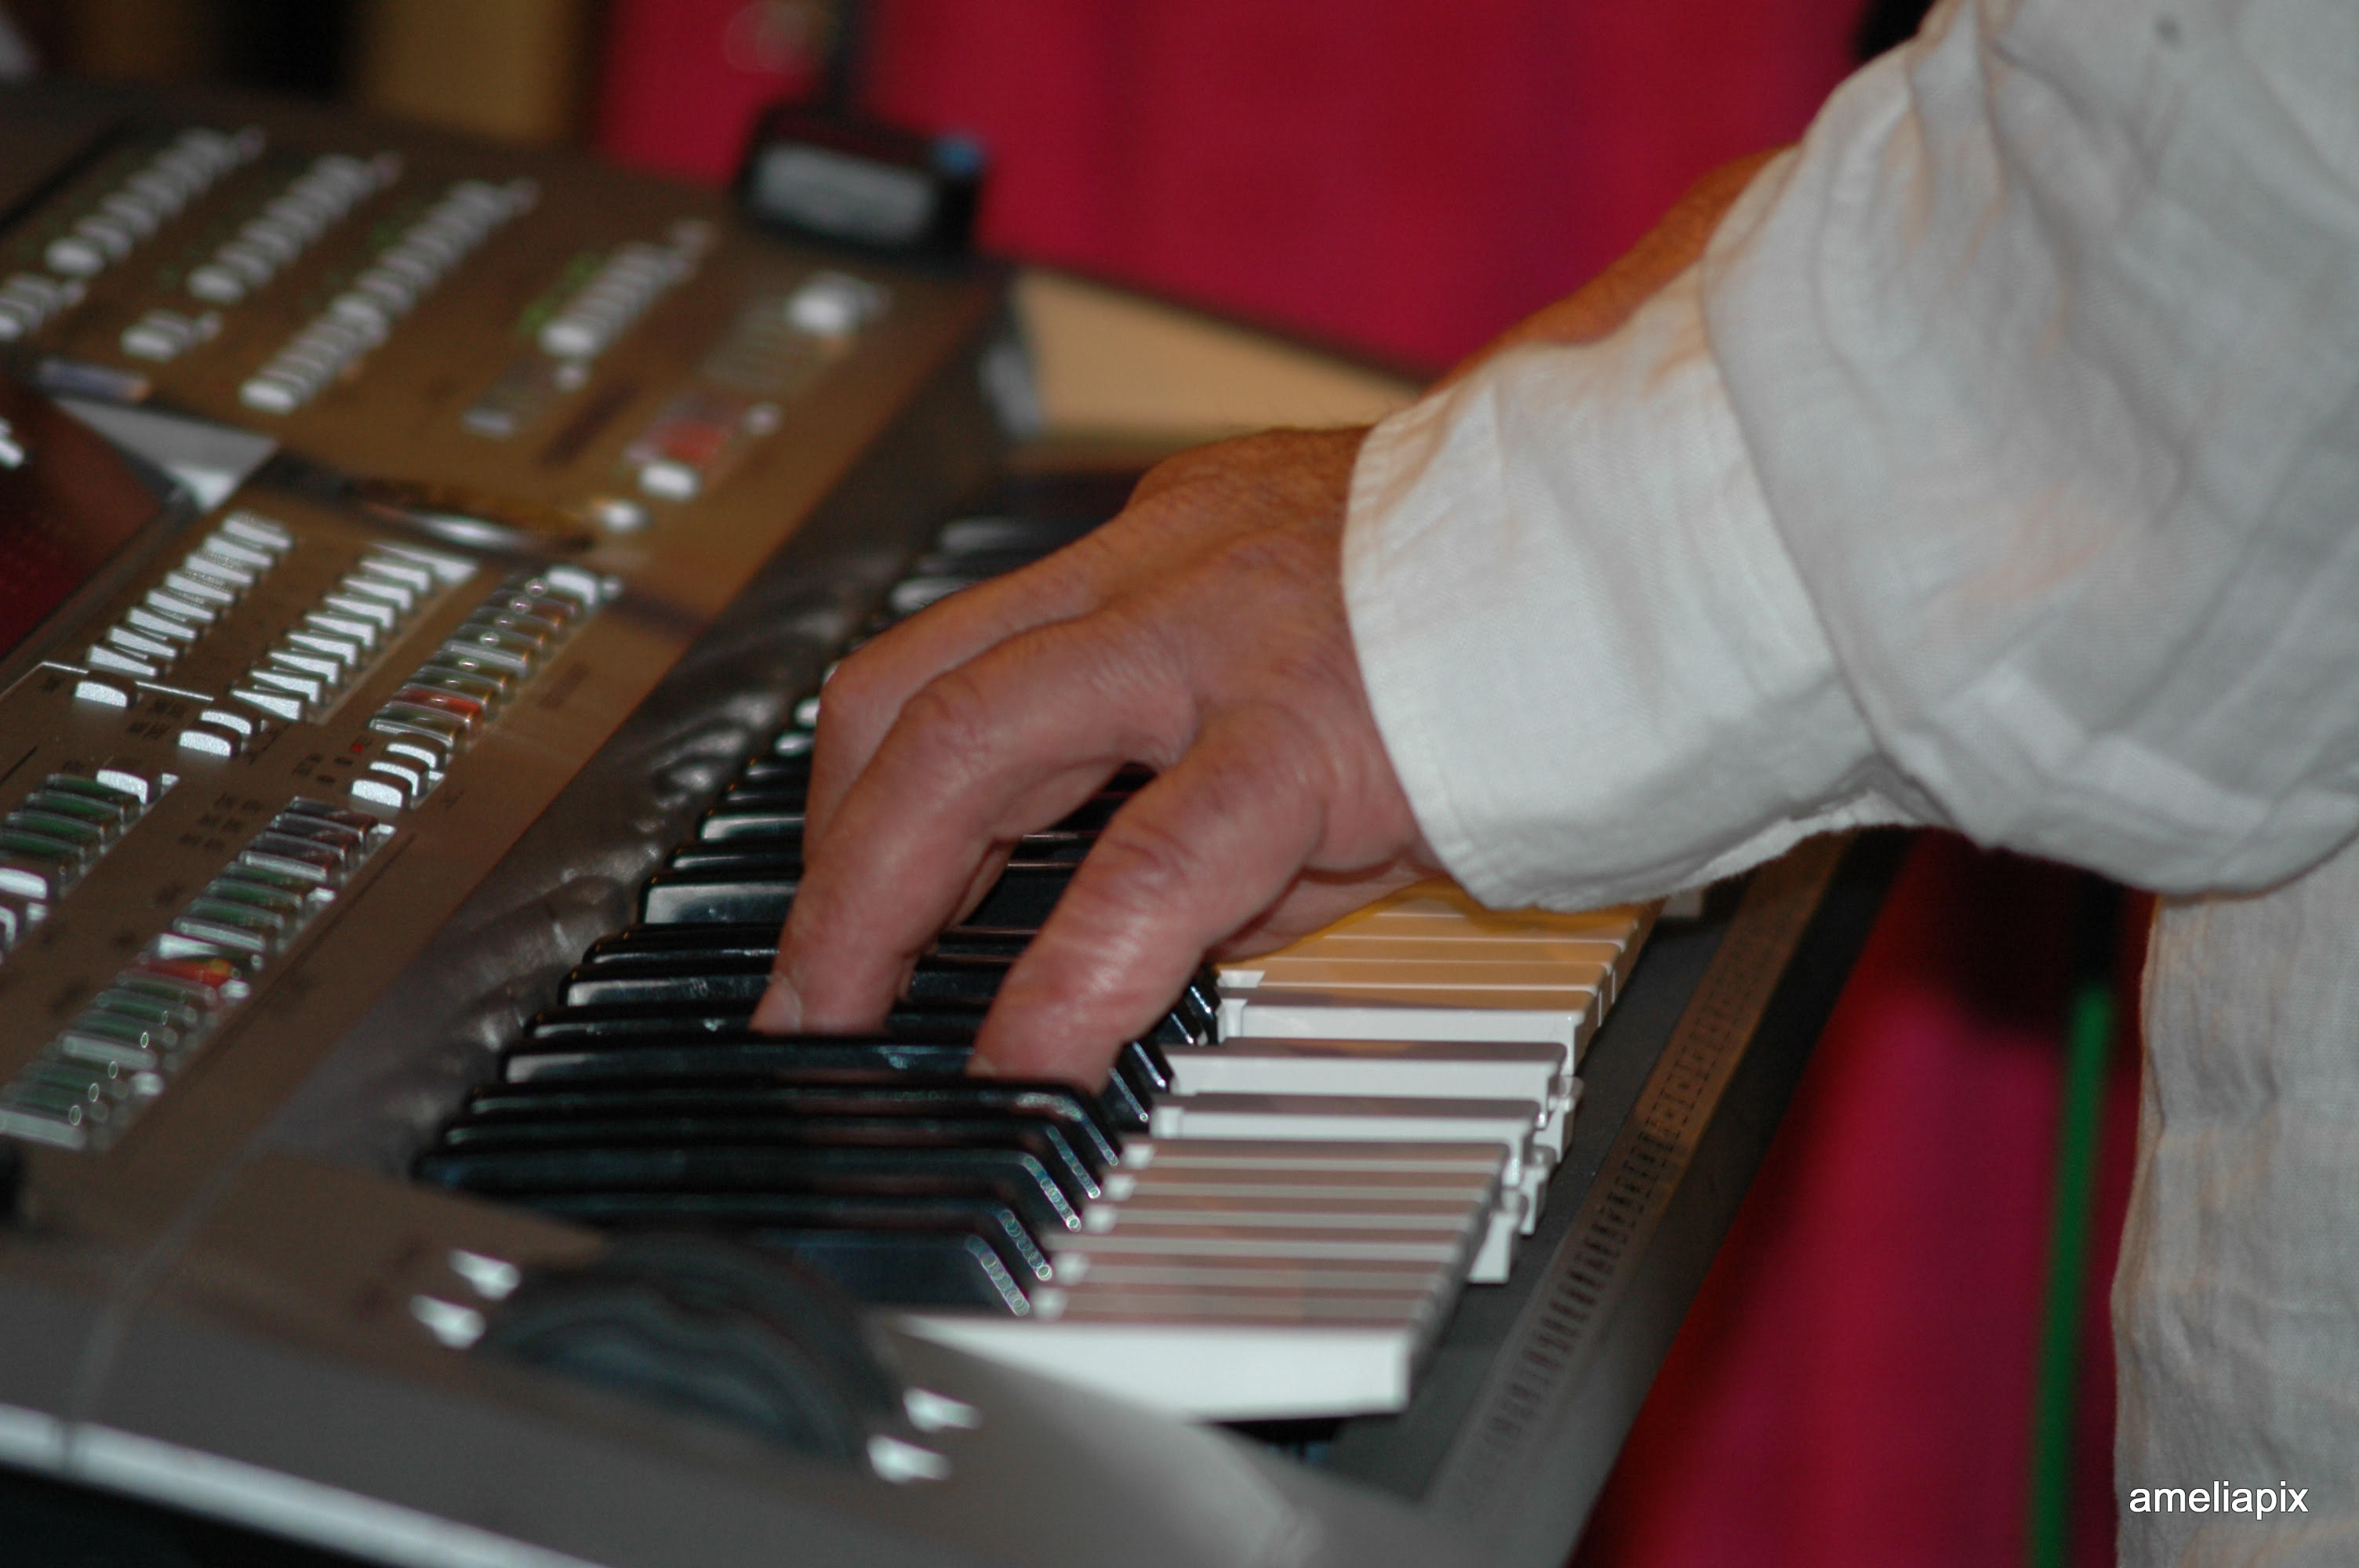 Tony Sheppard's hands on a silver synthesizer keyboard viewed in profile.